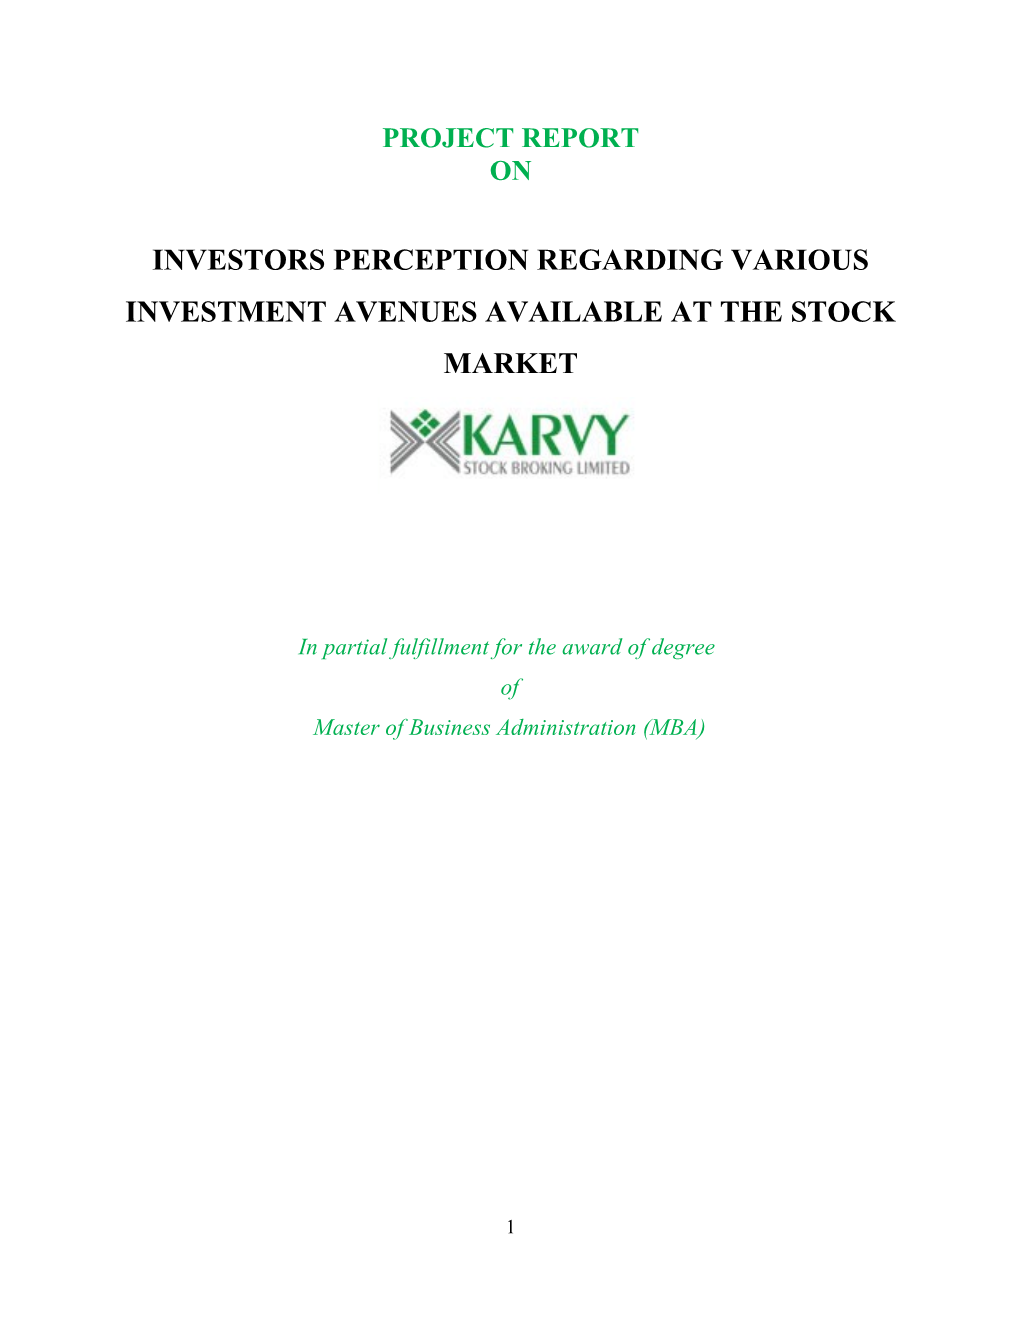 Investors Perception Regarding Various Investment Avenues Available at the Stock Market